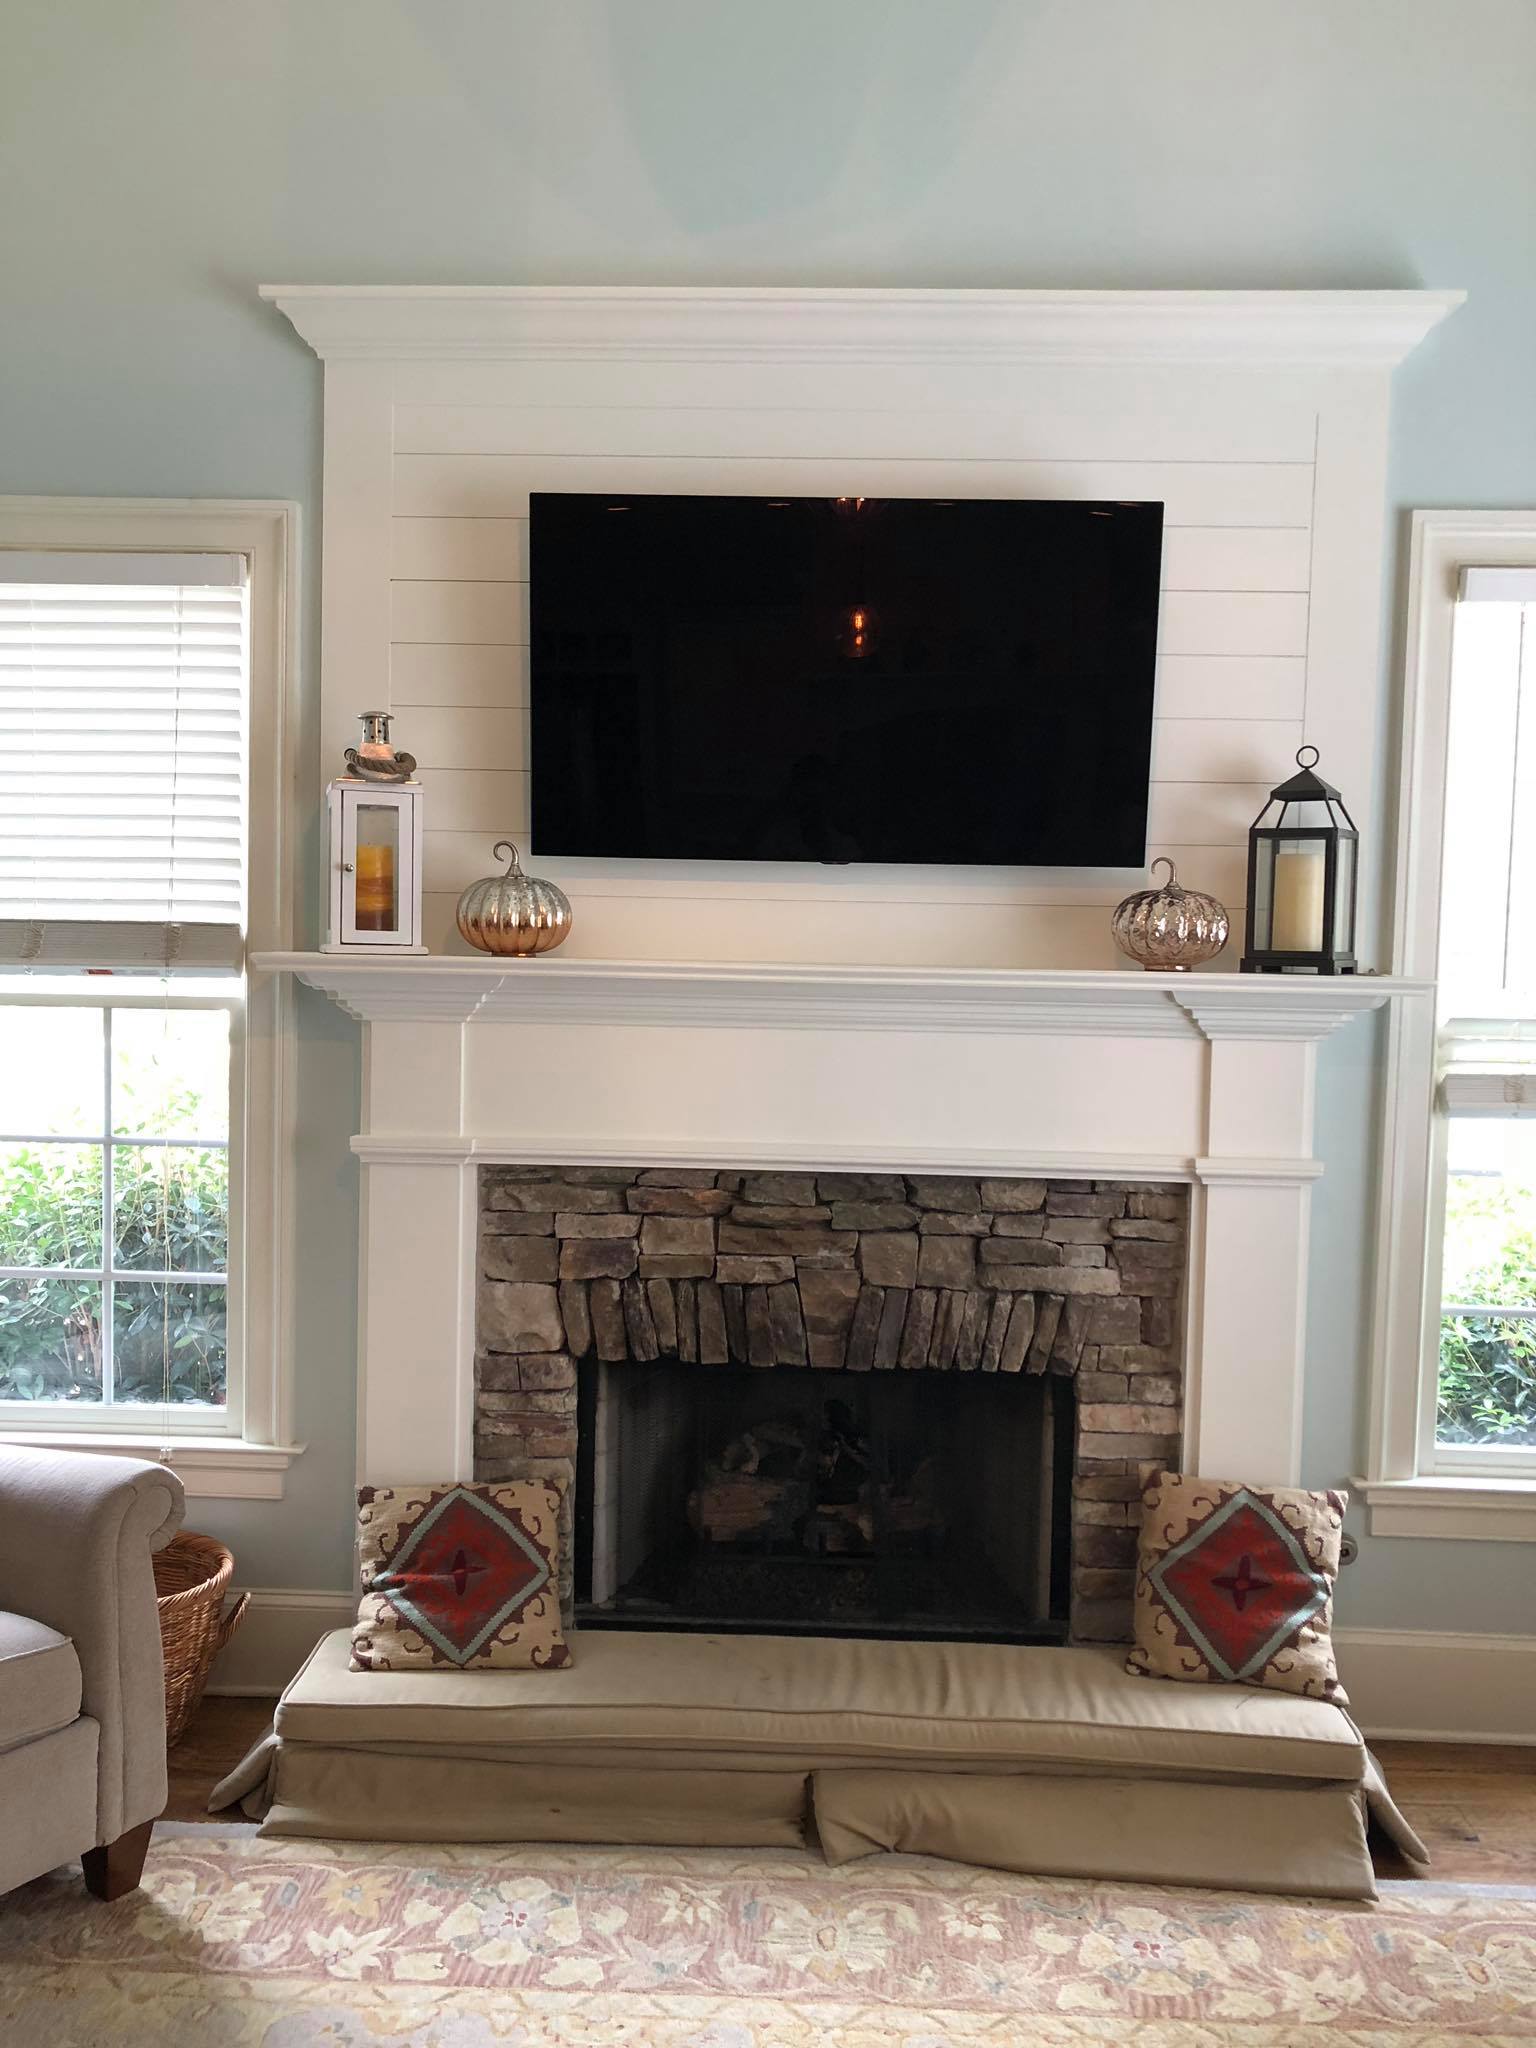 Fireplace Mantel and Trim Painted White